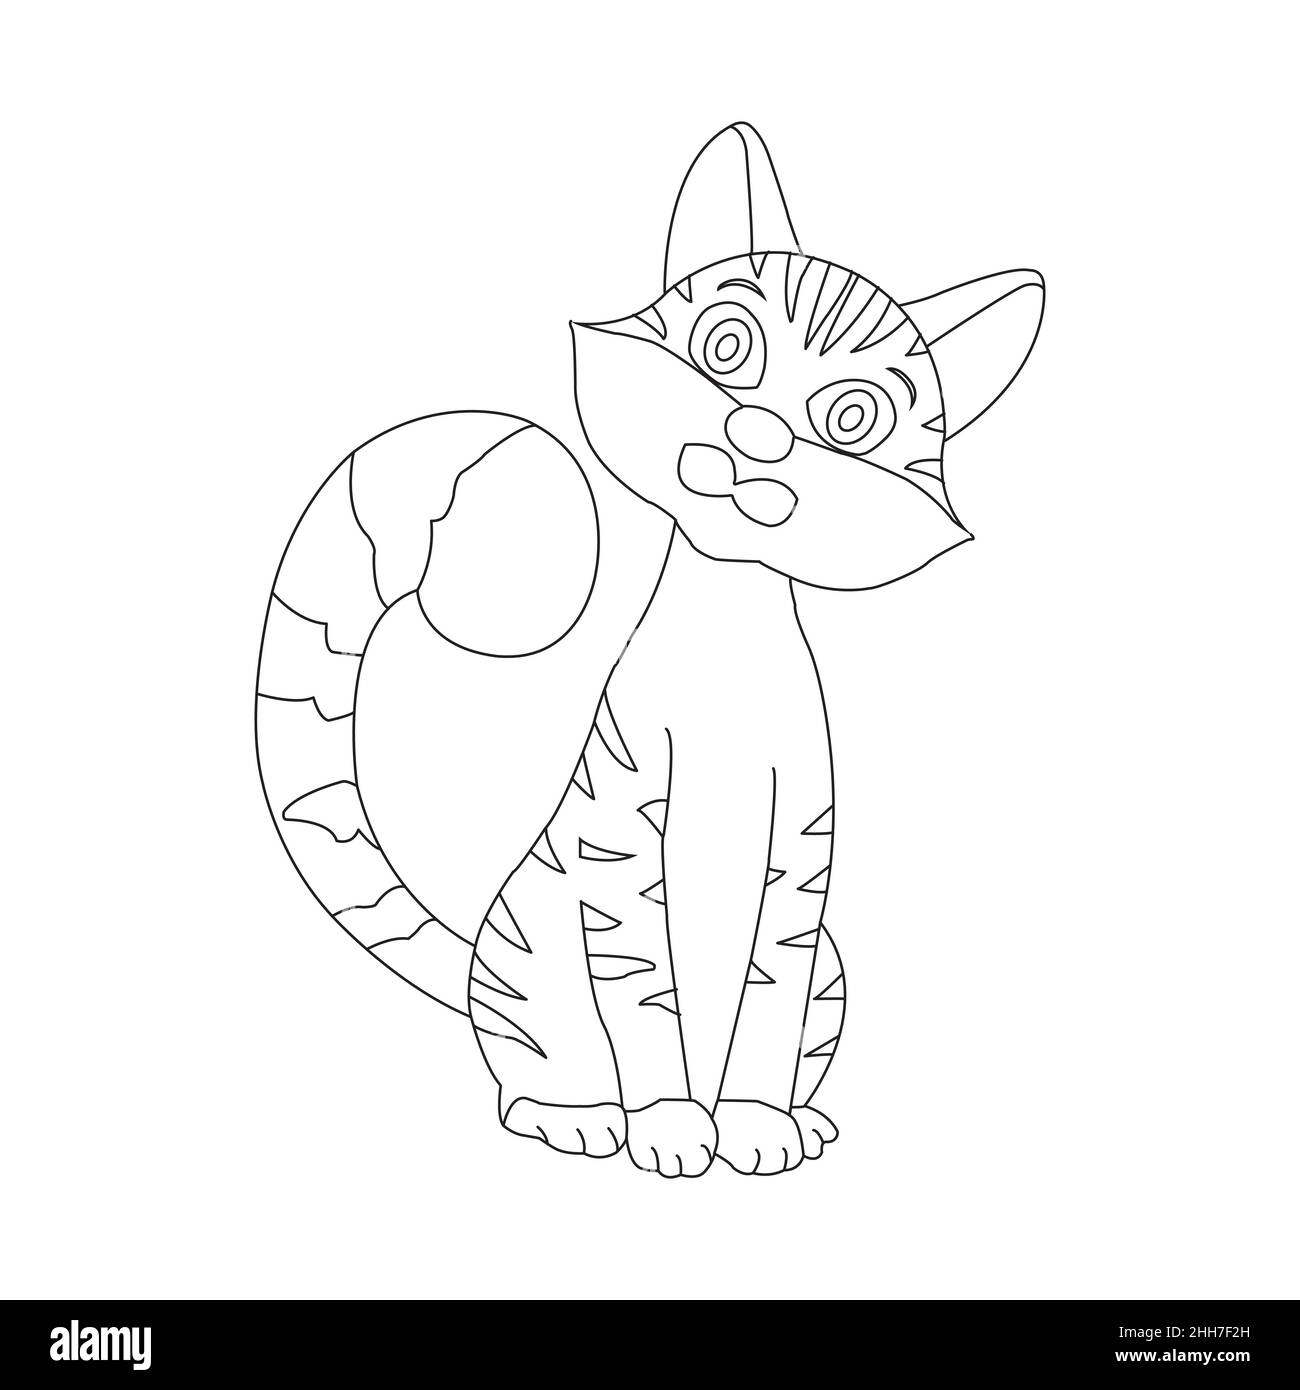 Coloring page outline of cute cat animal Coloring page cartoon vector illustration Stock Vector